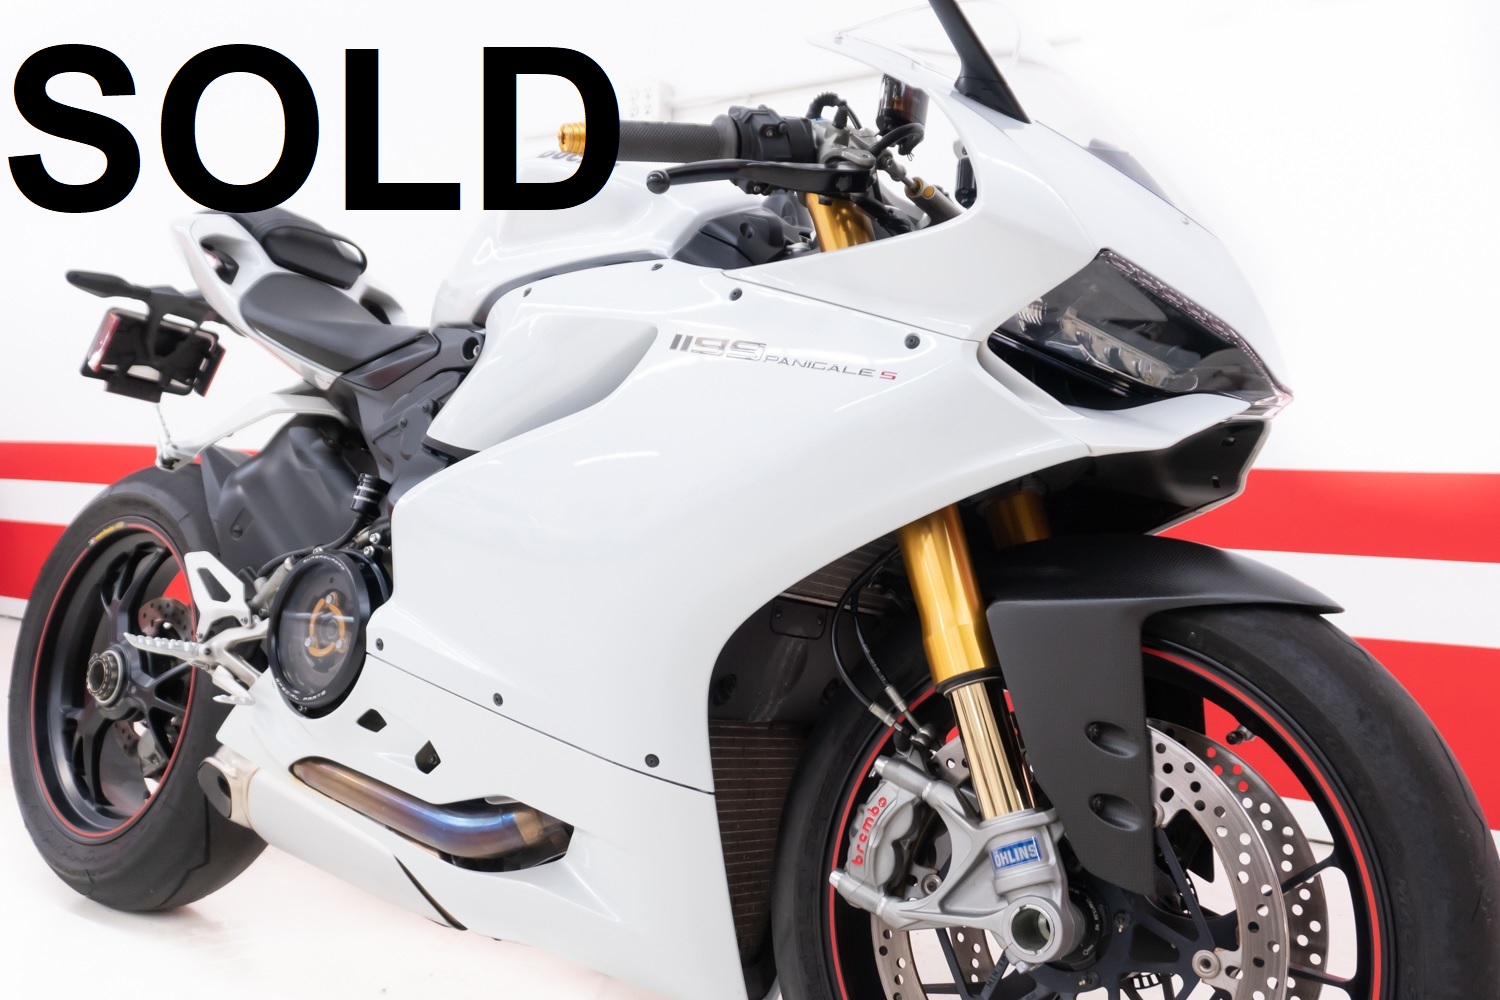 2013 Ducati 1199 Panigale S (ABS) - WHITE